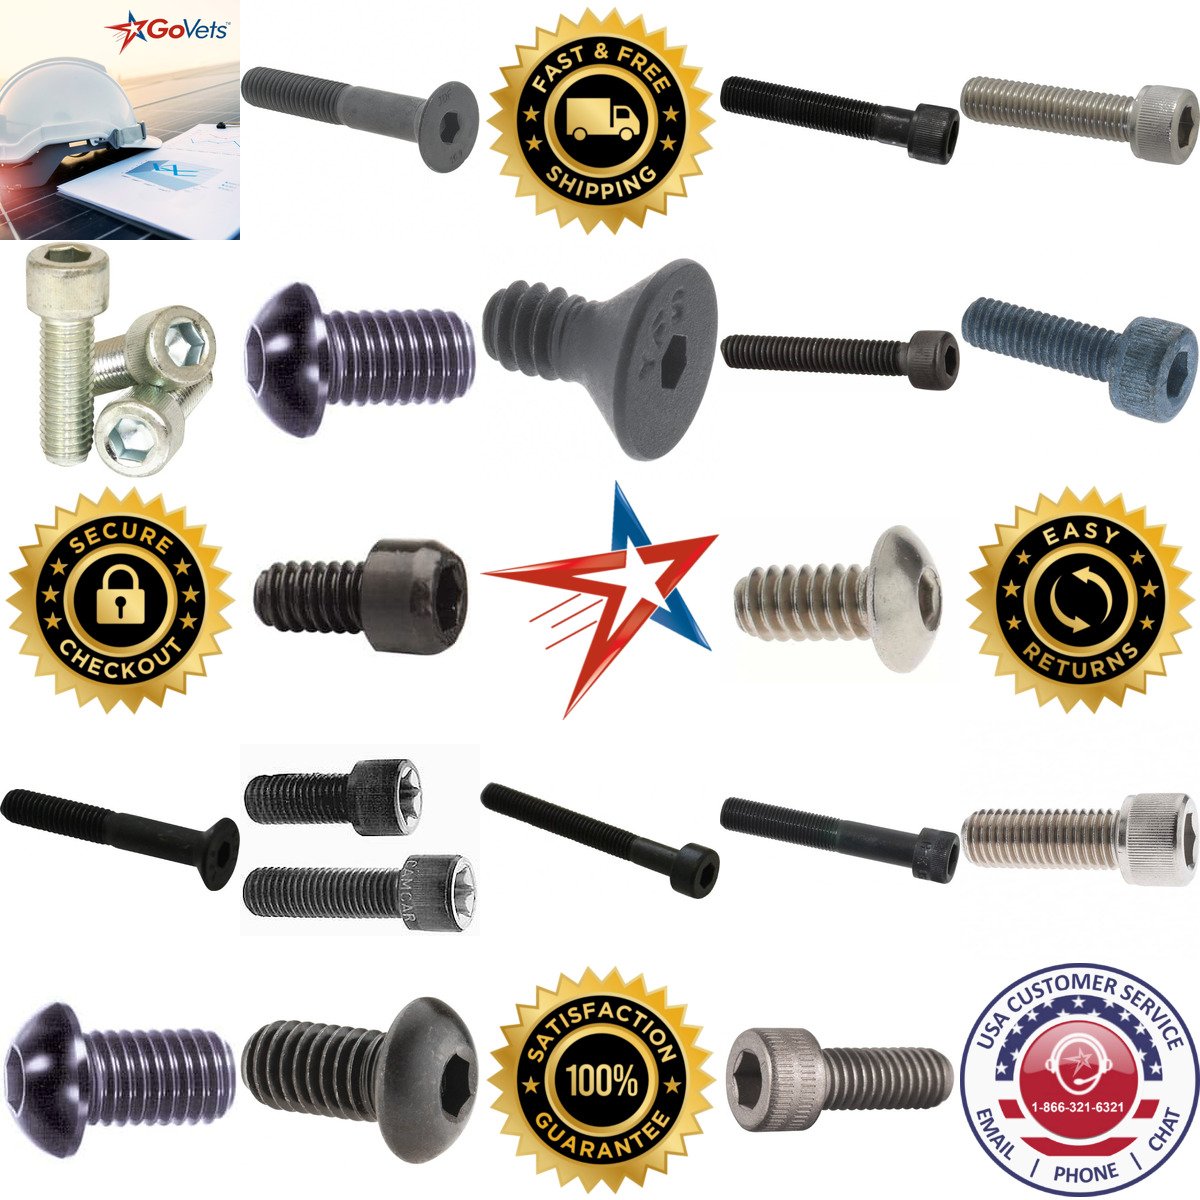 A selection of Socket Cap Screws products on GoVets